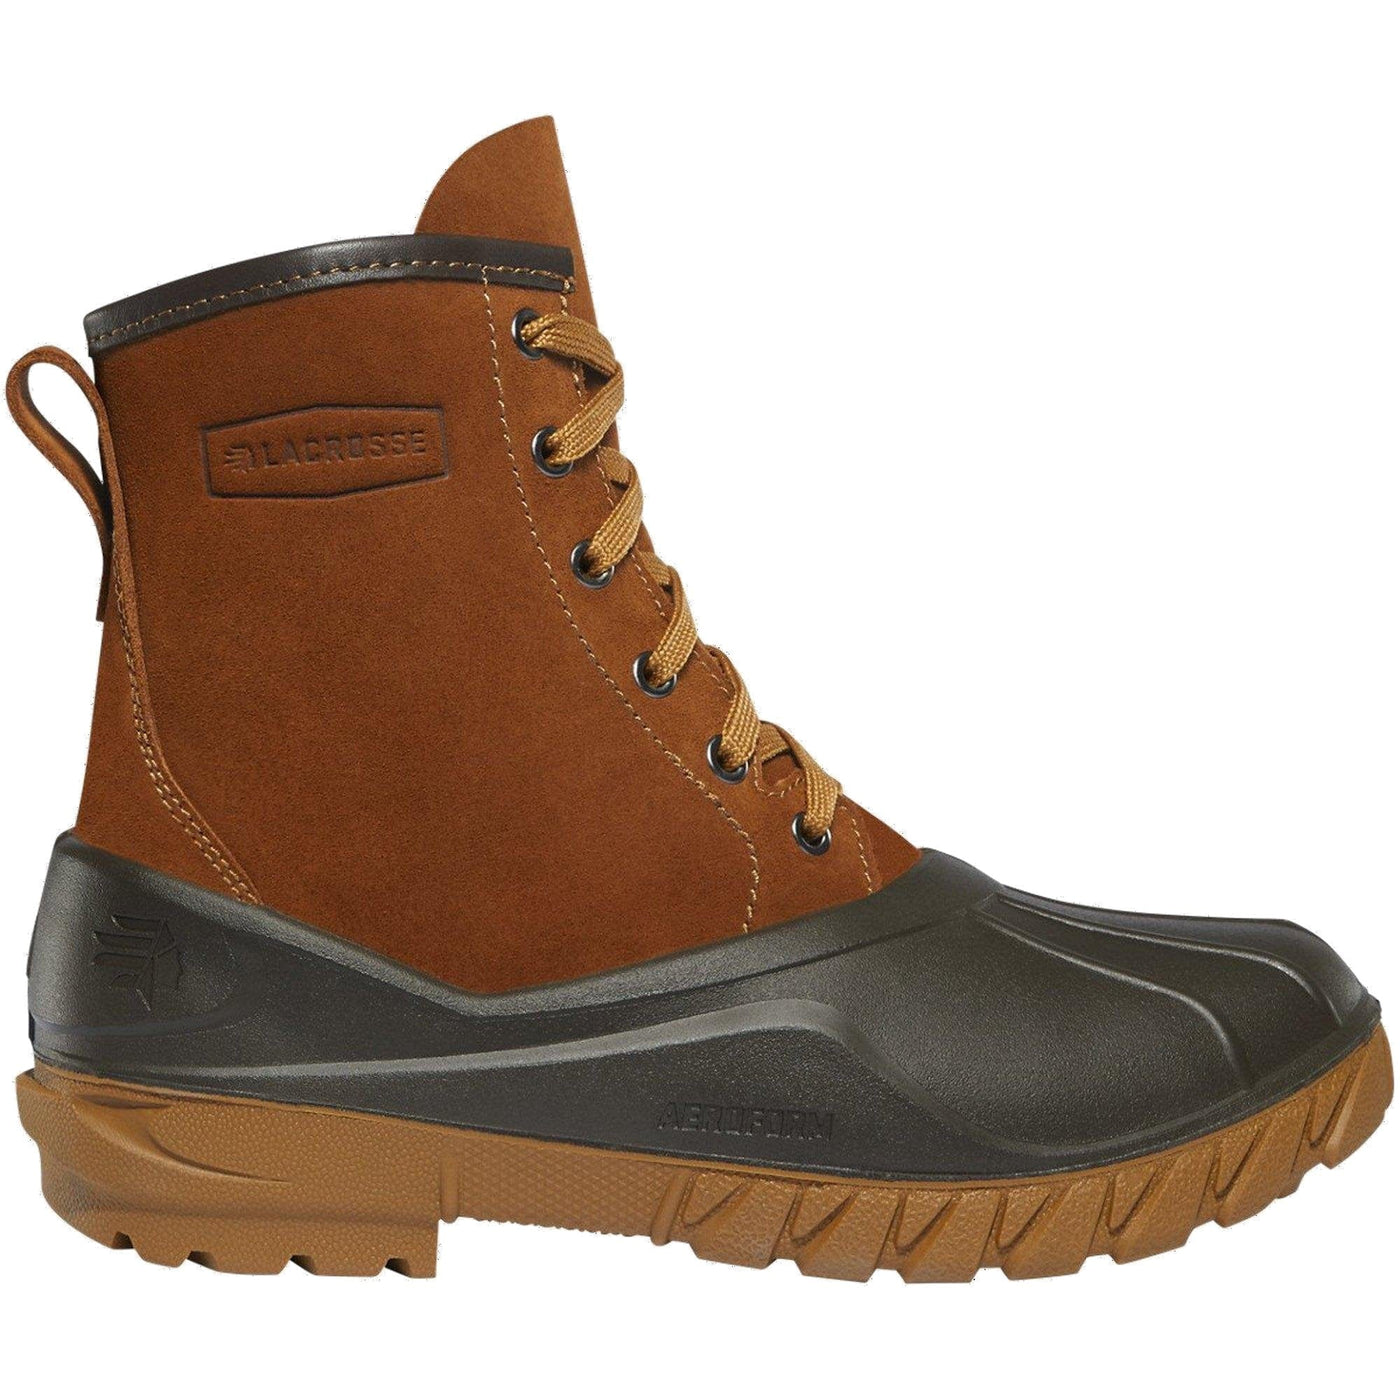 Lacrosse-Womens-Aero-Timber-Top-8-clay-brown-uninsulated-boots